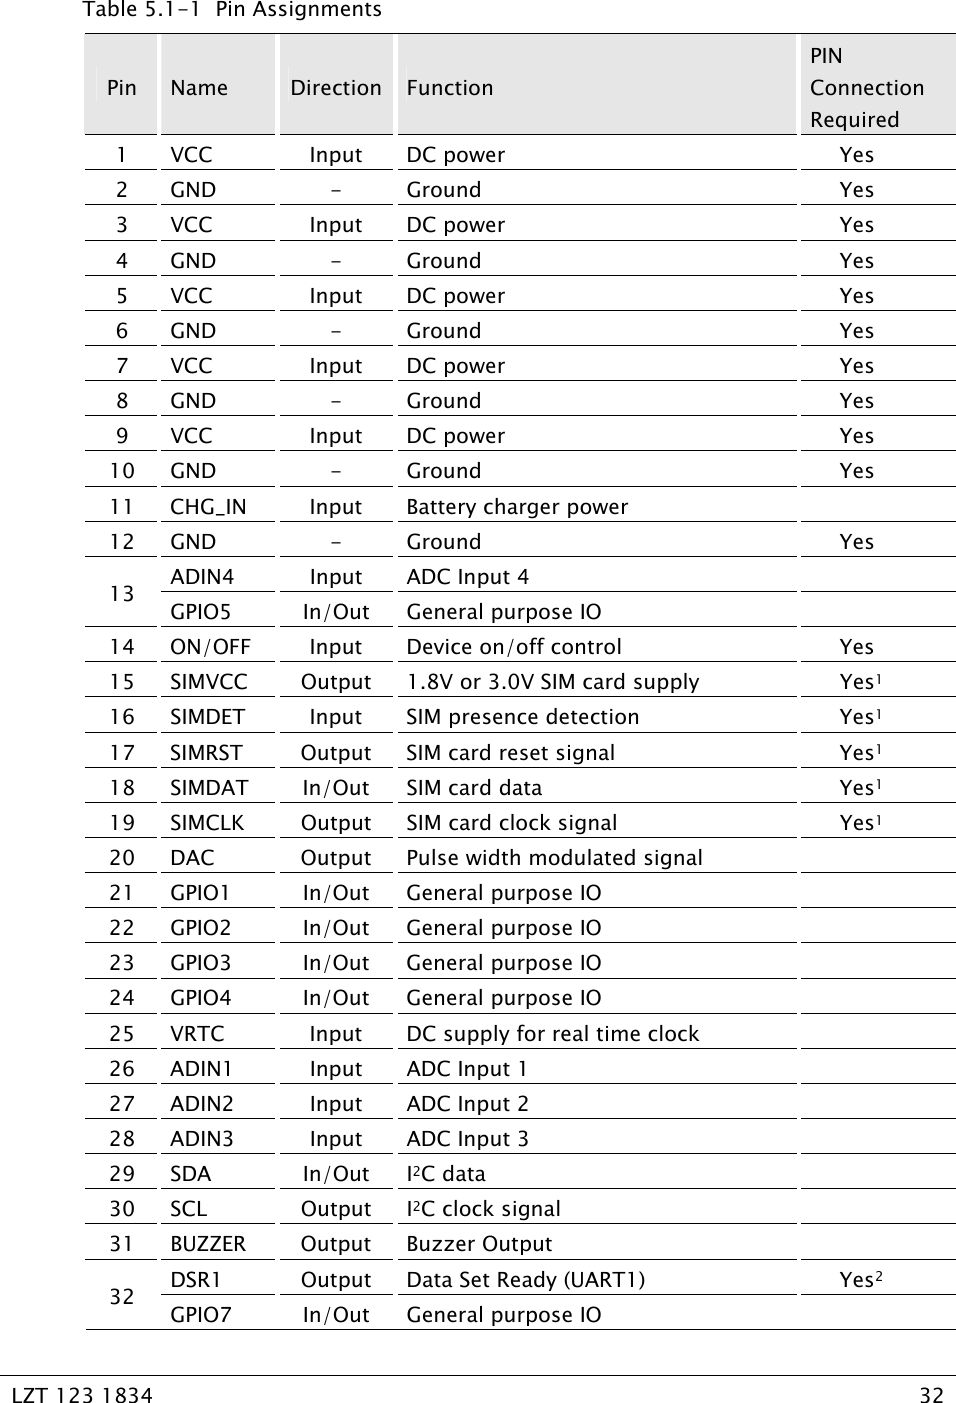   LZT 123 1834  32   Table 5.1-1  Pin Assignments Pin  Name  Direction Function PIN Connection Required 1 VCC  Input DC power  Yes 2 GND  -  Ground  Yes 3 VCC  Input DC power  Yes 4 GND  -  Ground  Yes 5 VCC  Input DC power  Yes 6 GND  -  Ground  Yes 7 VCC  Input DC power  Yes 8 GND  -  Ground  Yes 9 VCC  Input DC power  Yes 10 GND  -  Ground  Yes 11  CHG_IN  Input  Battery charger power   12 GND  -  Ground  Yes ADIN4 Input ADC Input 4   13  GPIO5  In/Out  General purpose IO   14 ON/OFF  Input  Device on/off control  Yes 15  SIMVCC  Output  1.8V or 3.0V SIM card supply  Yes1 16  SIMDET  Input  SIM presence detection  Yes1 17  SIMRST  Output  SIM card reset signal  Yes1 18 SIMDAT  In/Out SIM card data  Yes1 19  SIMCLK  Output  SIM card clock signal  Yes1 20  DAC  Output  Pulse width modulated signal   21  GPIO1  In/Out  General purpose IO   22  GPIO2  In/Out  General purpose IO   23  GPIO3  In/Out  General purpose IO   24  GPIO4  In/Out  General purpose IO   25  VRTC  Input  DC supply for real time clock   26 ADIN1  Input  ADC Input 1   27 ADIN2  Input  ADC Input 2   28 ADIN3  Input  ADC Input 3   29 SDA  In/Out I2C data   30 SCL  Output I2C clock signal   31 BUZZER  Output Buzzer Output   DSR1  Output  Data Set Ready (UART1)  Yes2 32  GPIO7  In/Out  General purpose IO   